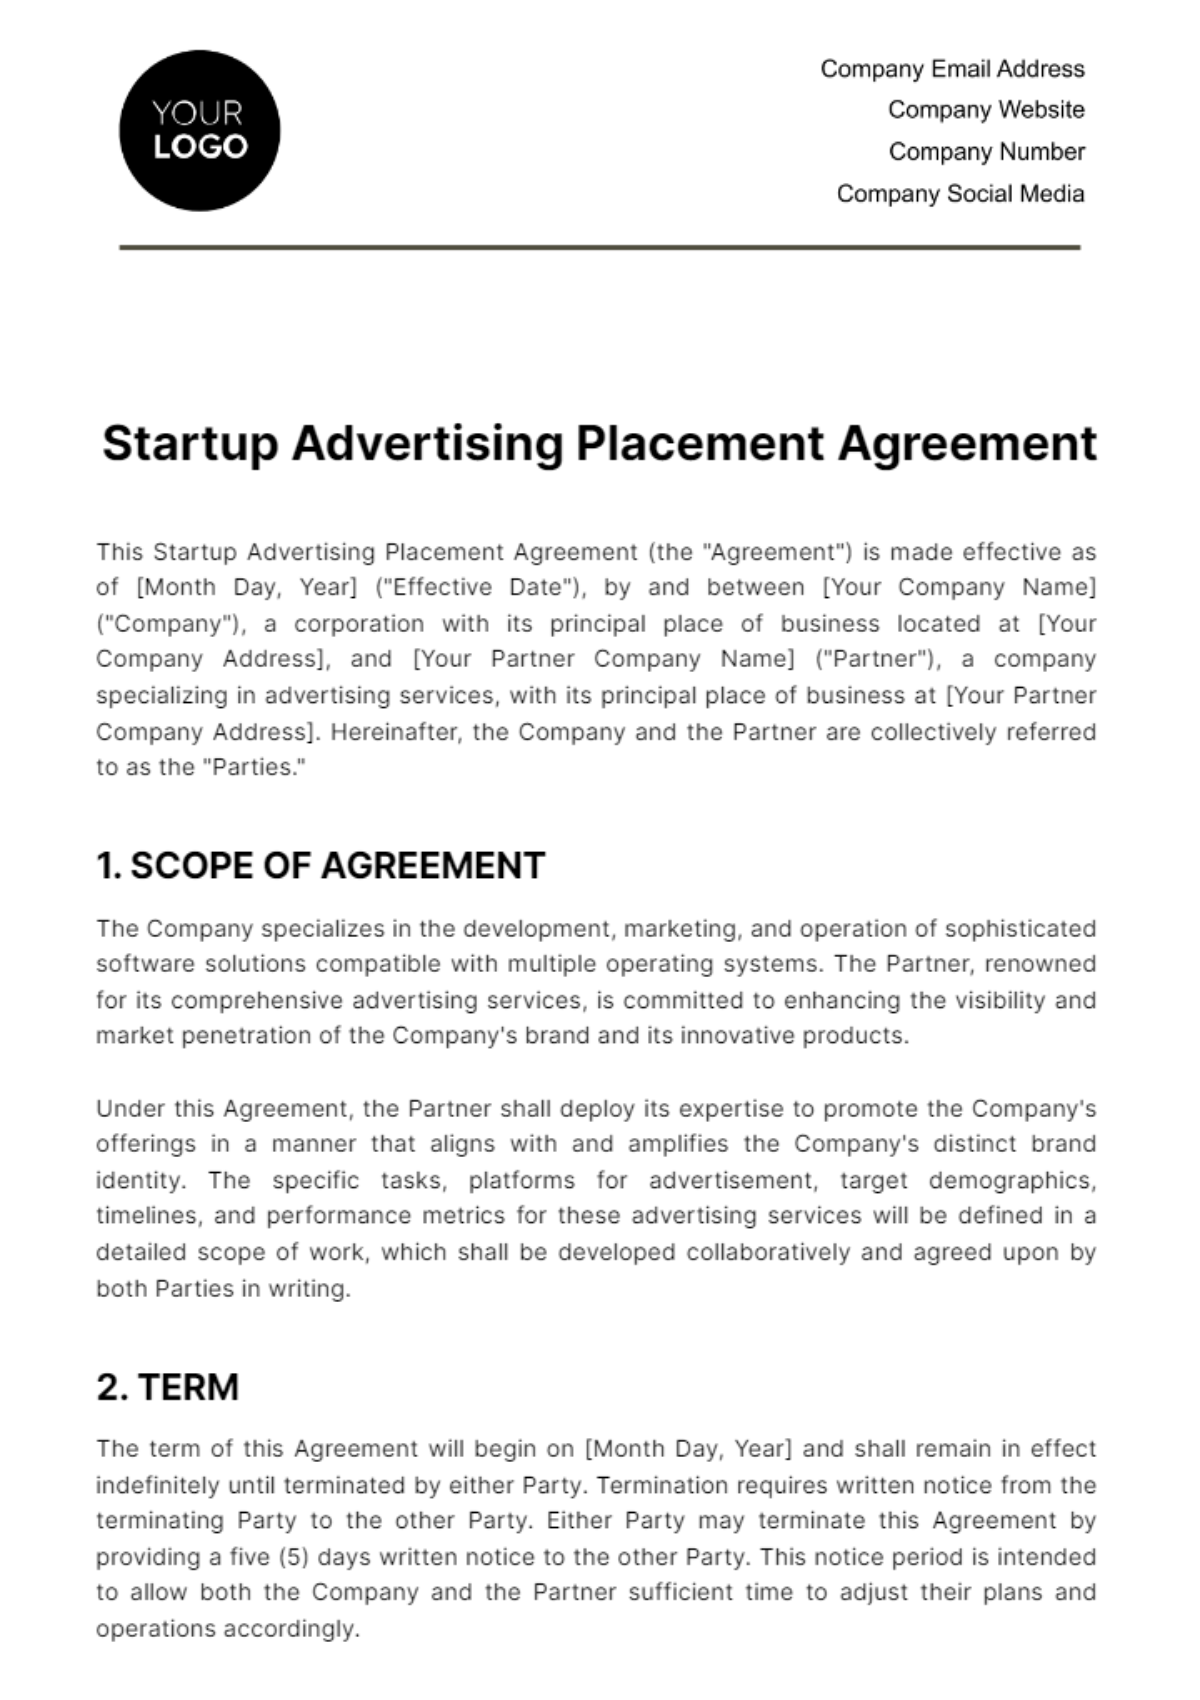 Startup Advertising Placement Agreement Template